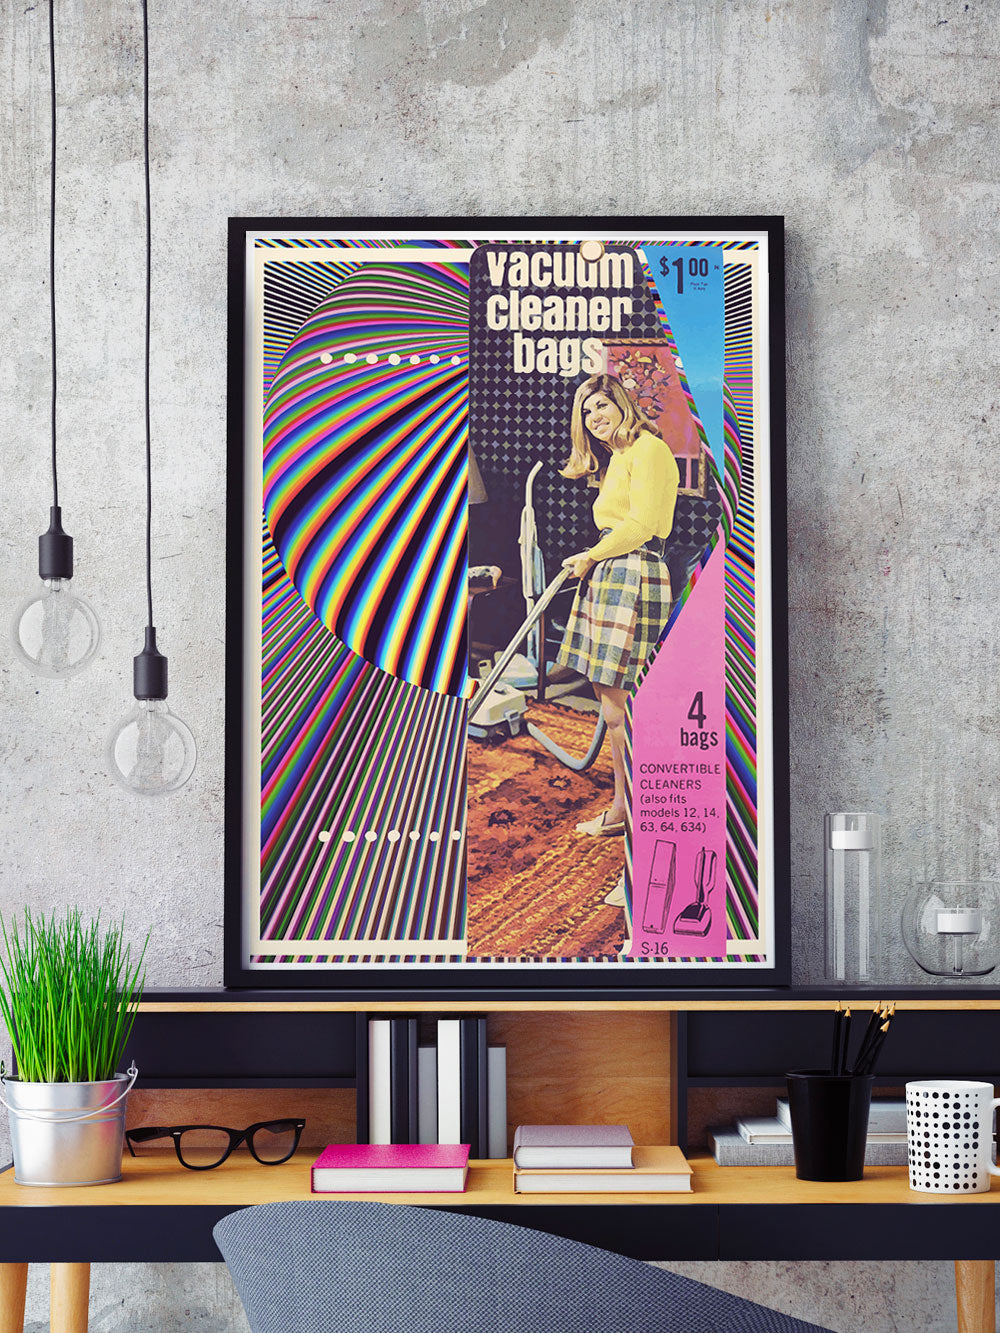 Cut and Paste Rug Retro Print in a frame on a shelf